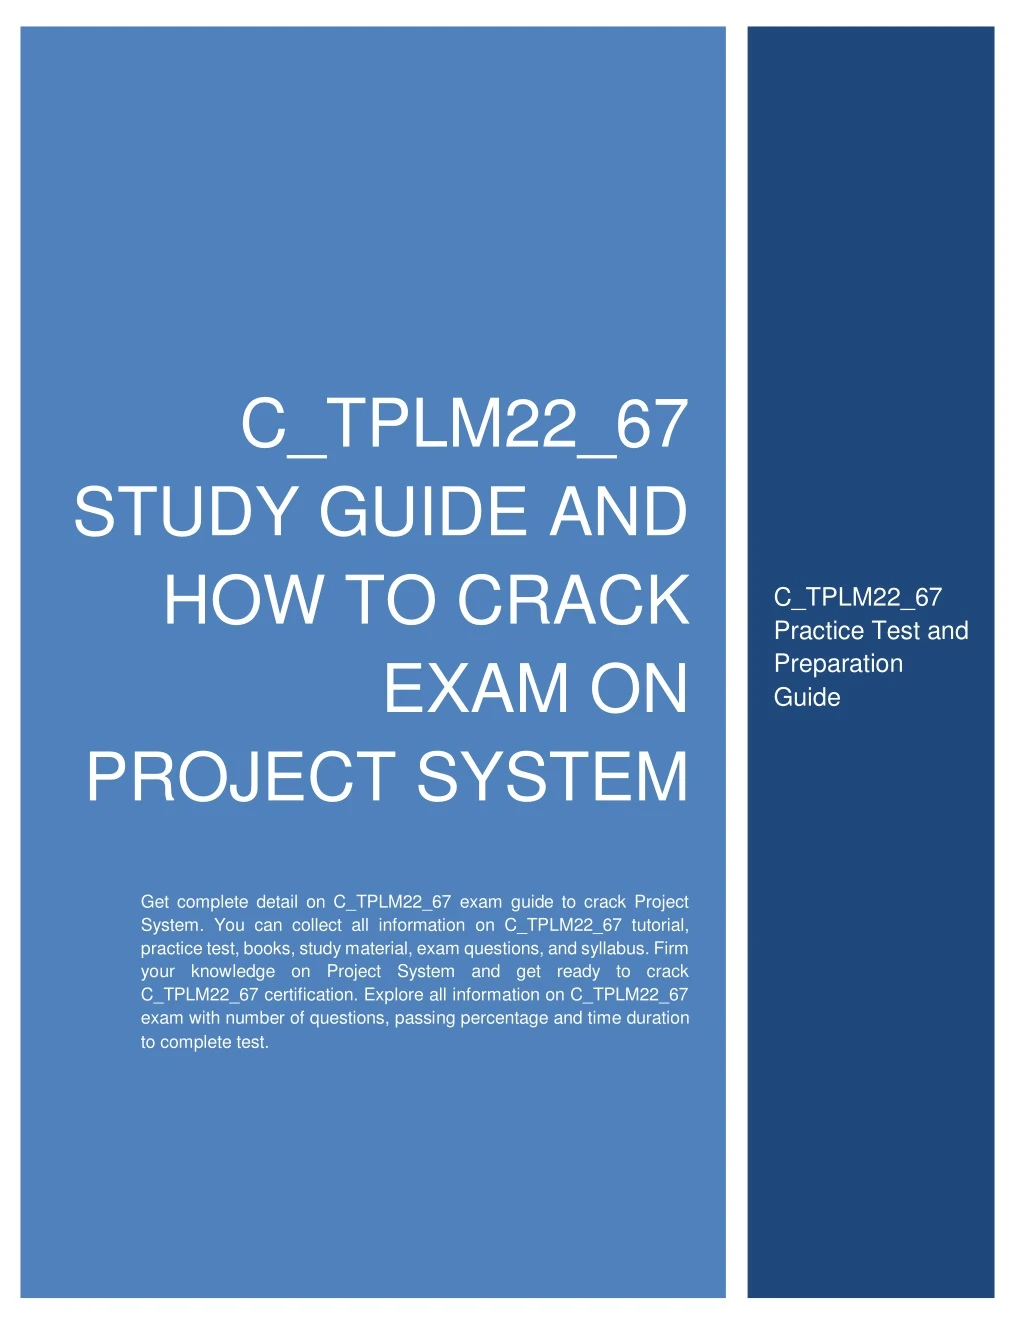 c tplm22 67 study guide and how to crack exam